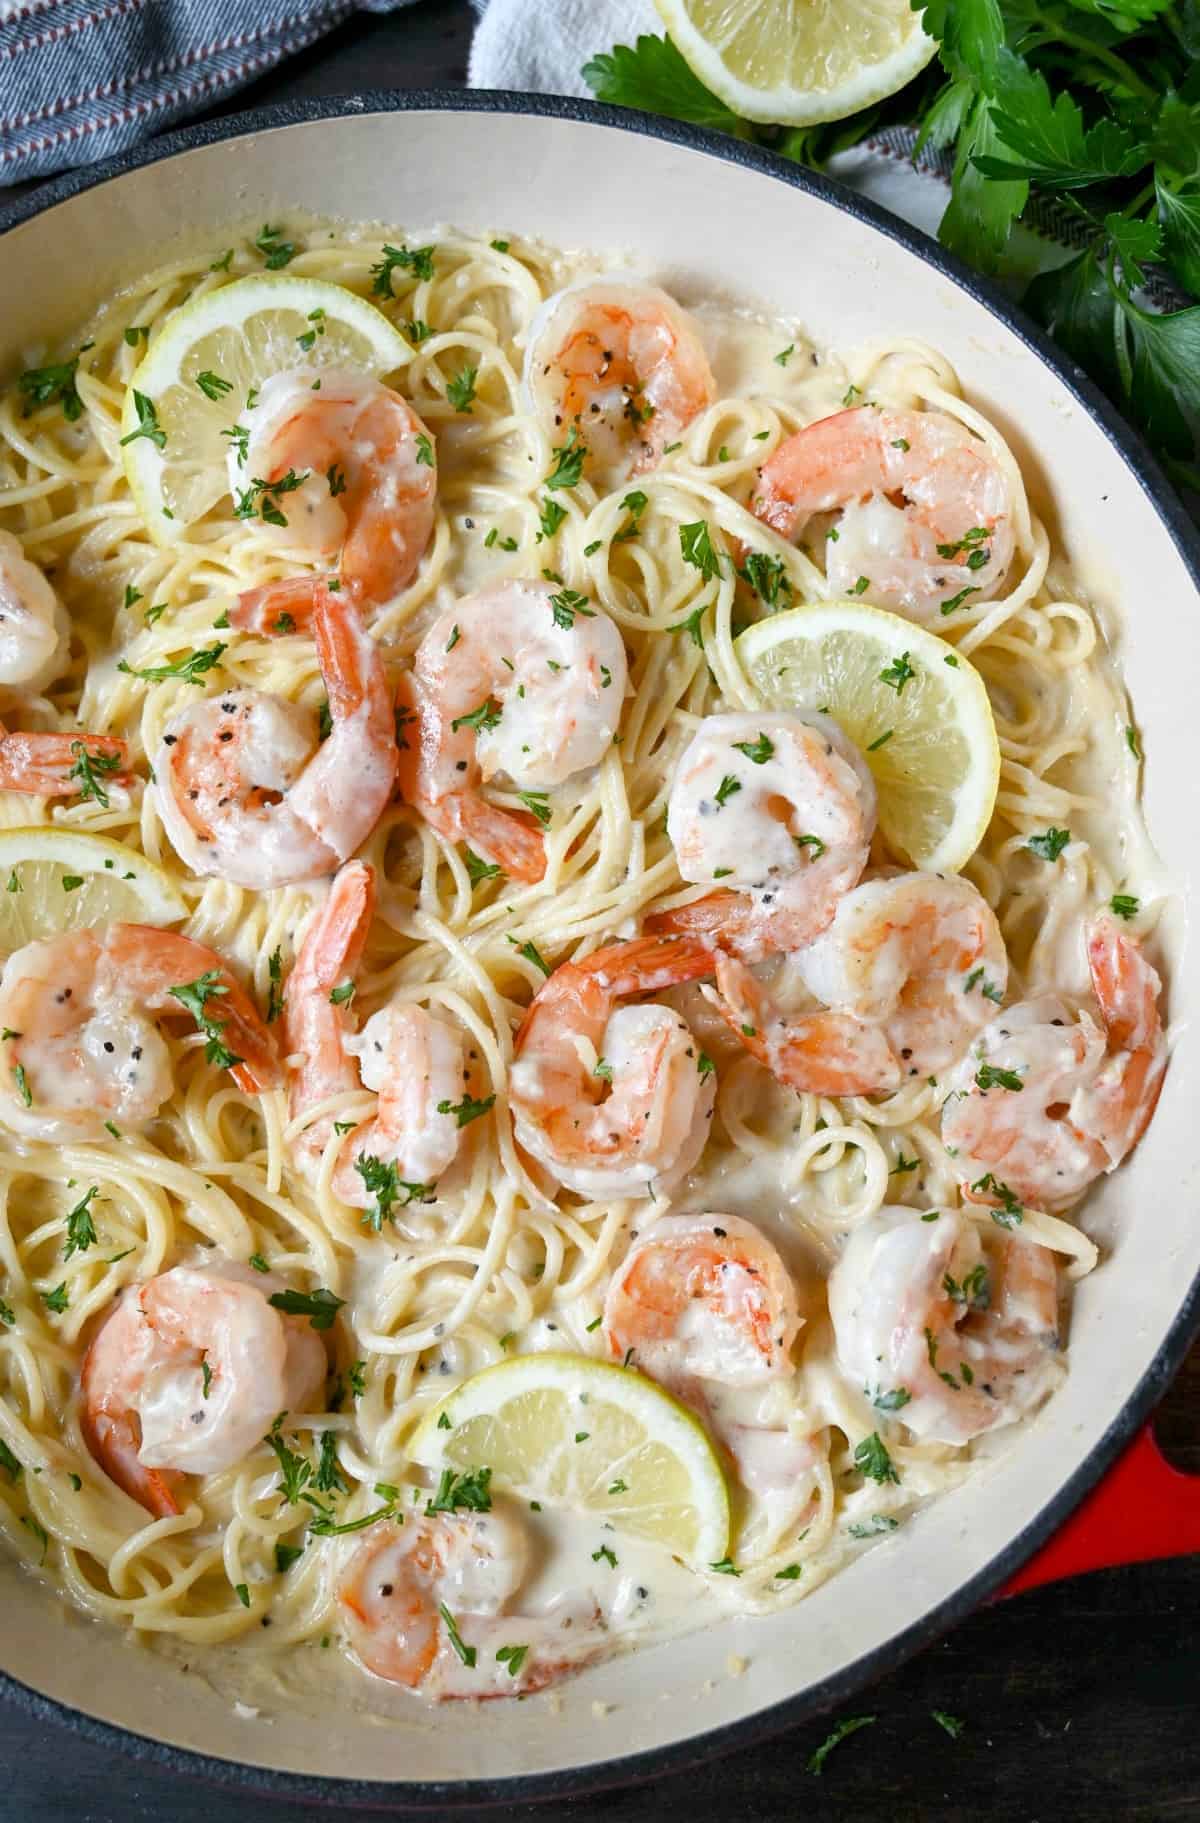 Shrimp pasta in a cast iron red dish with lemon slices and fresh parsley on top.